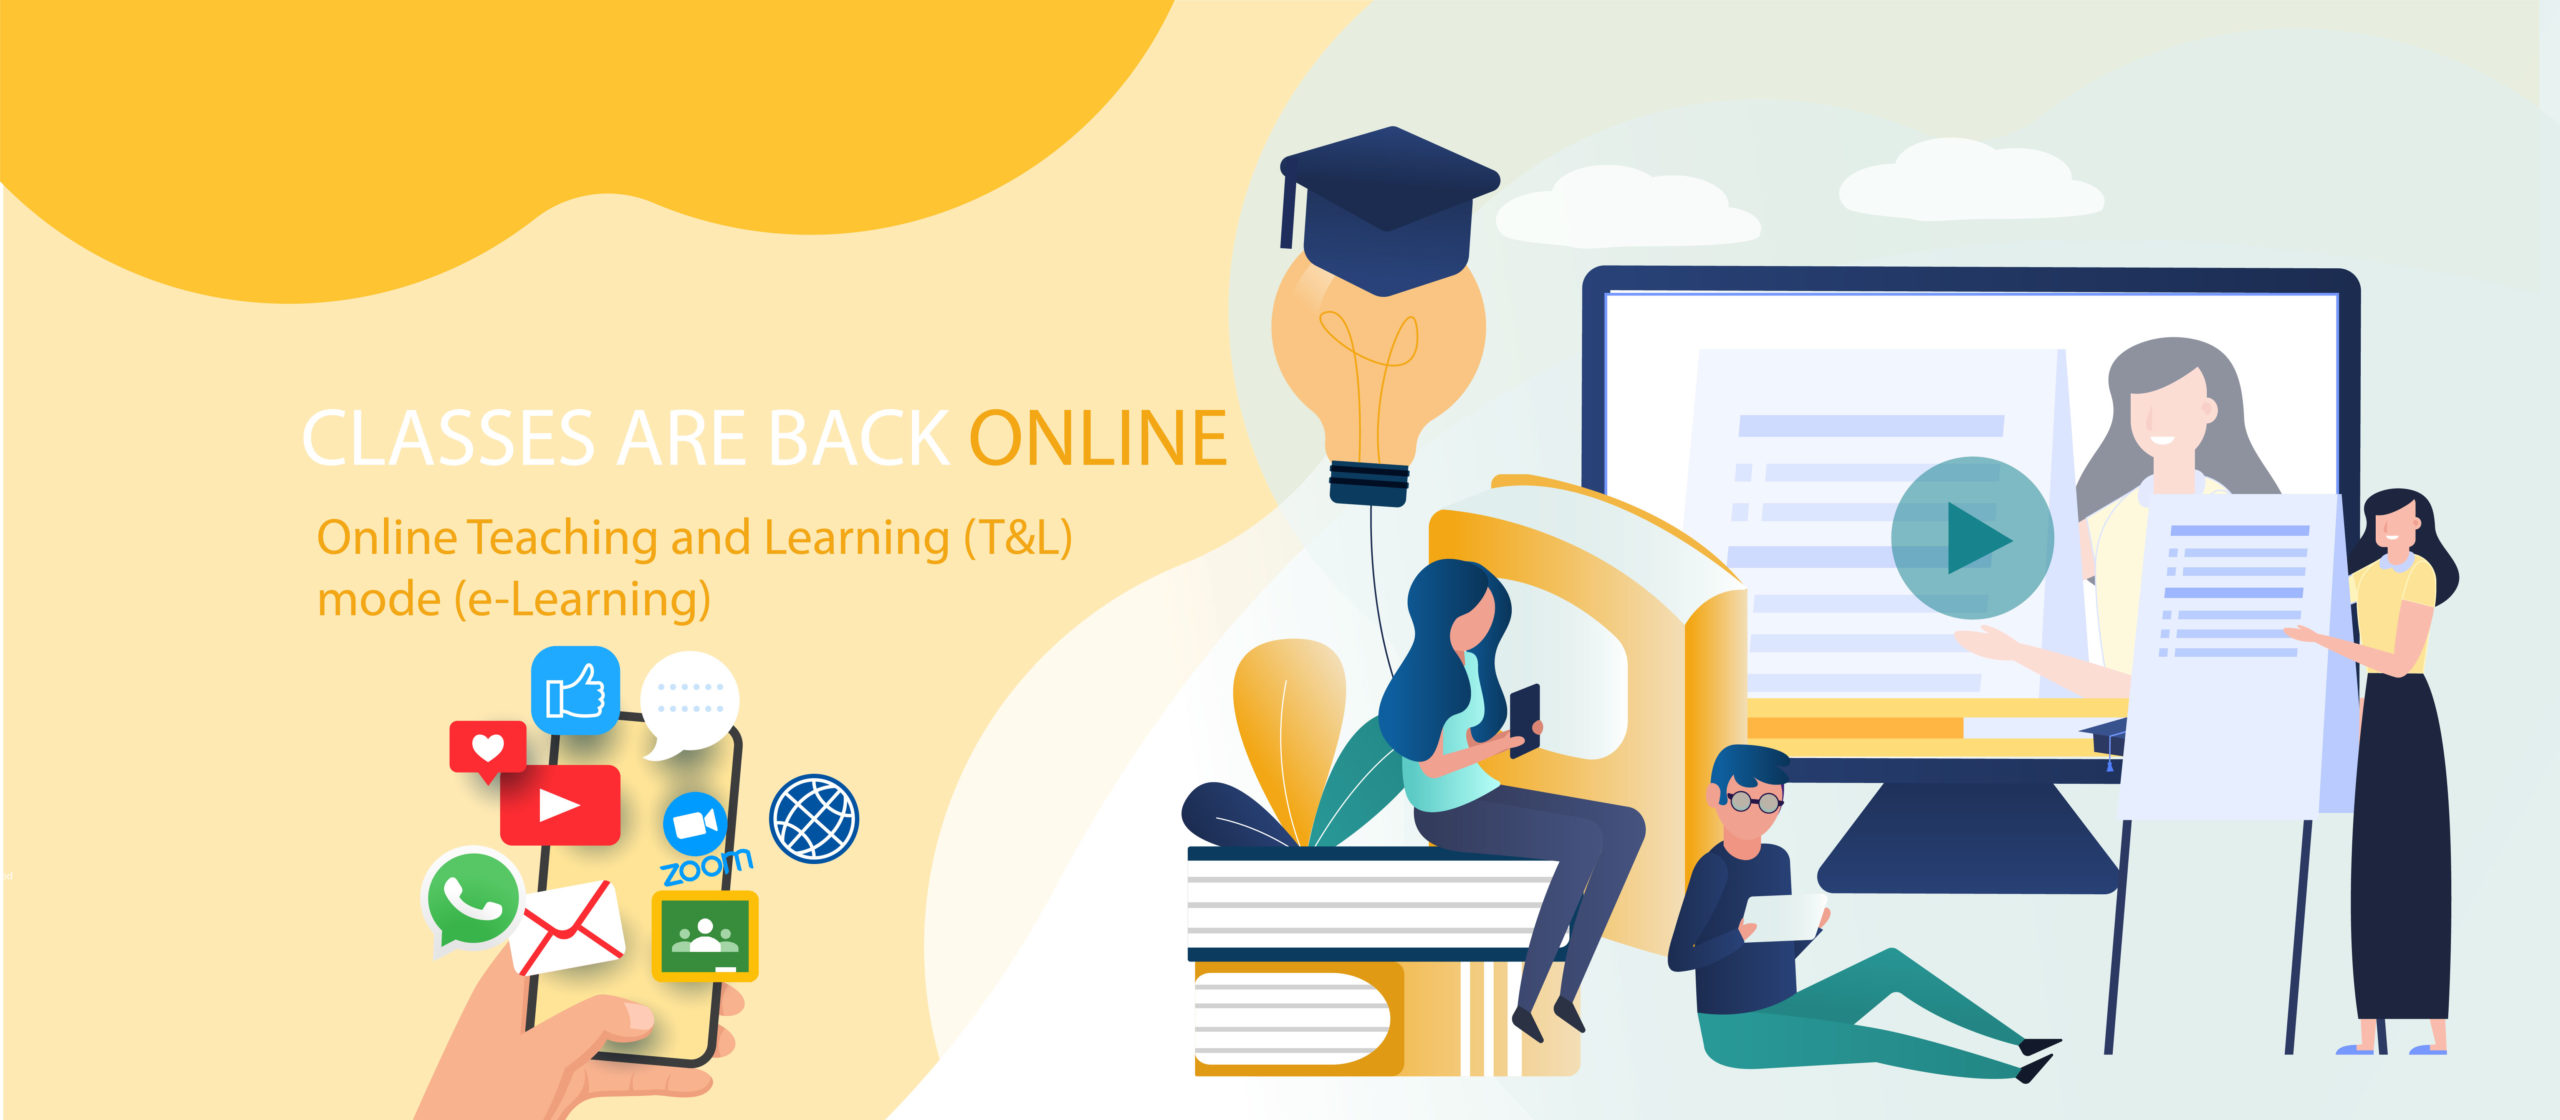 Online Teaching and Learning (T&L) mode (e-Learning)